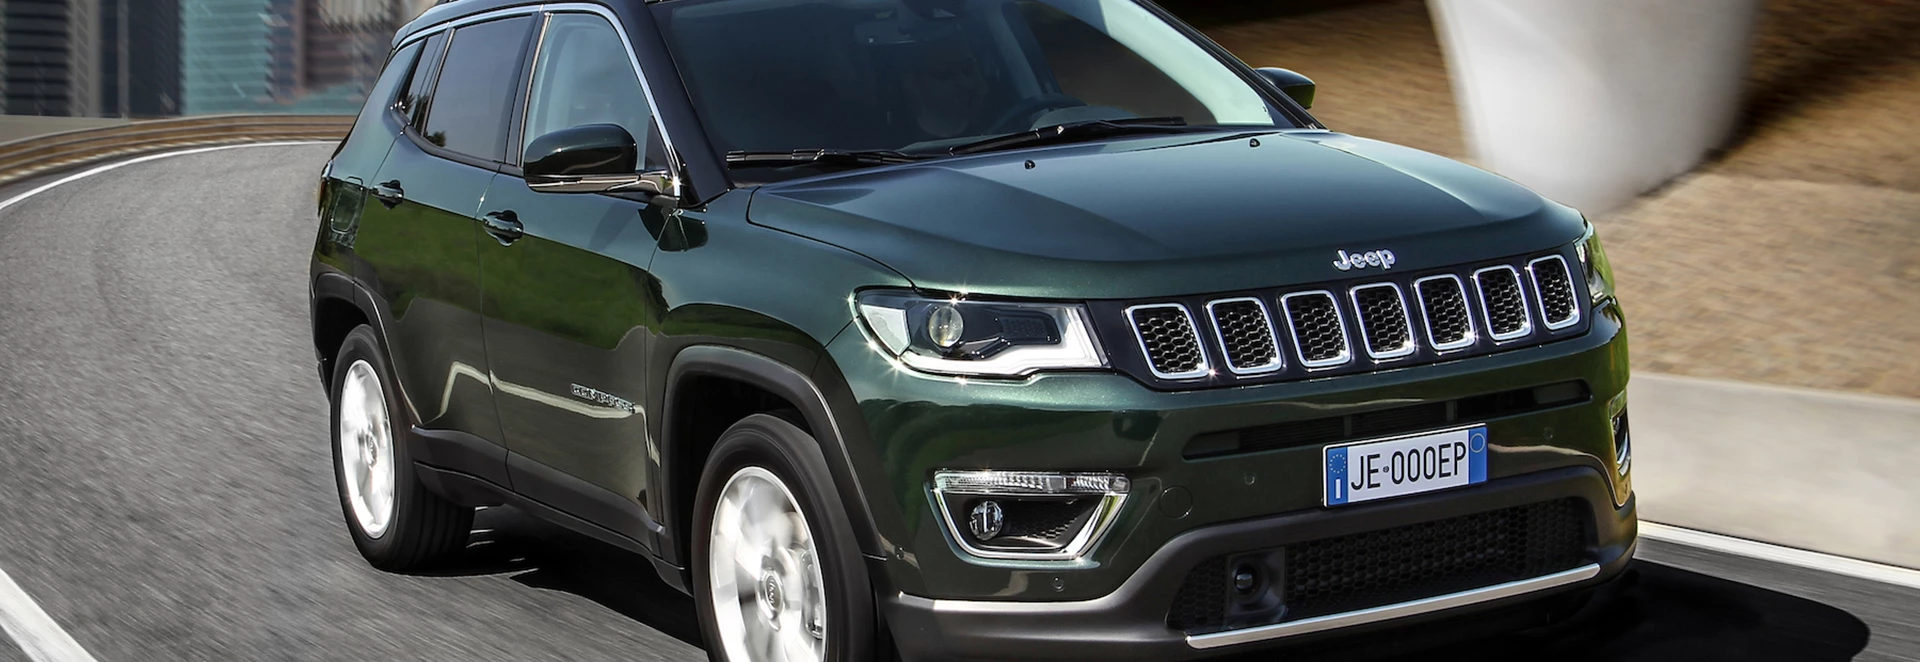 2021 Jeep Compass unveiled 